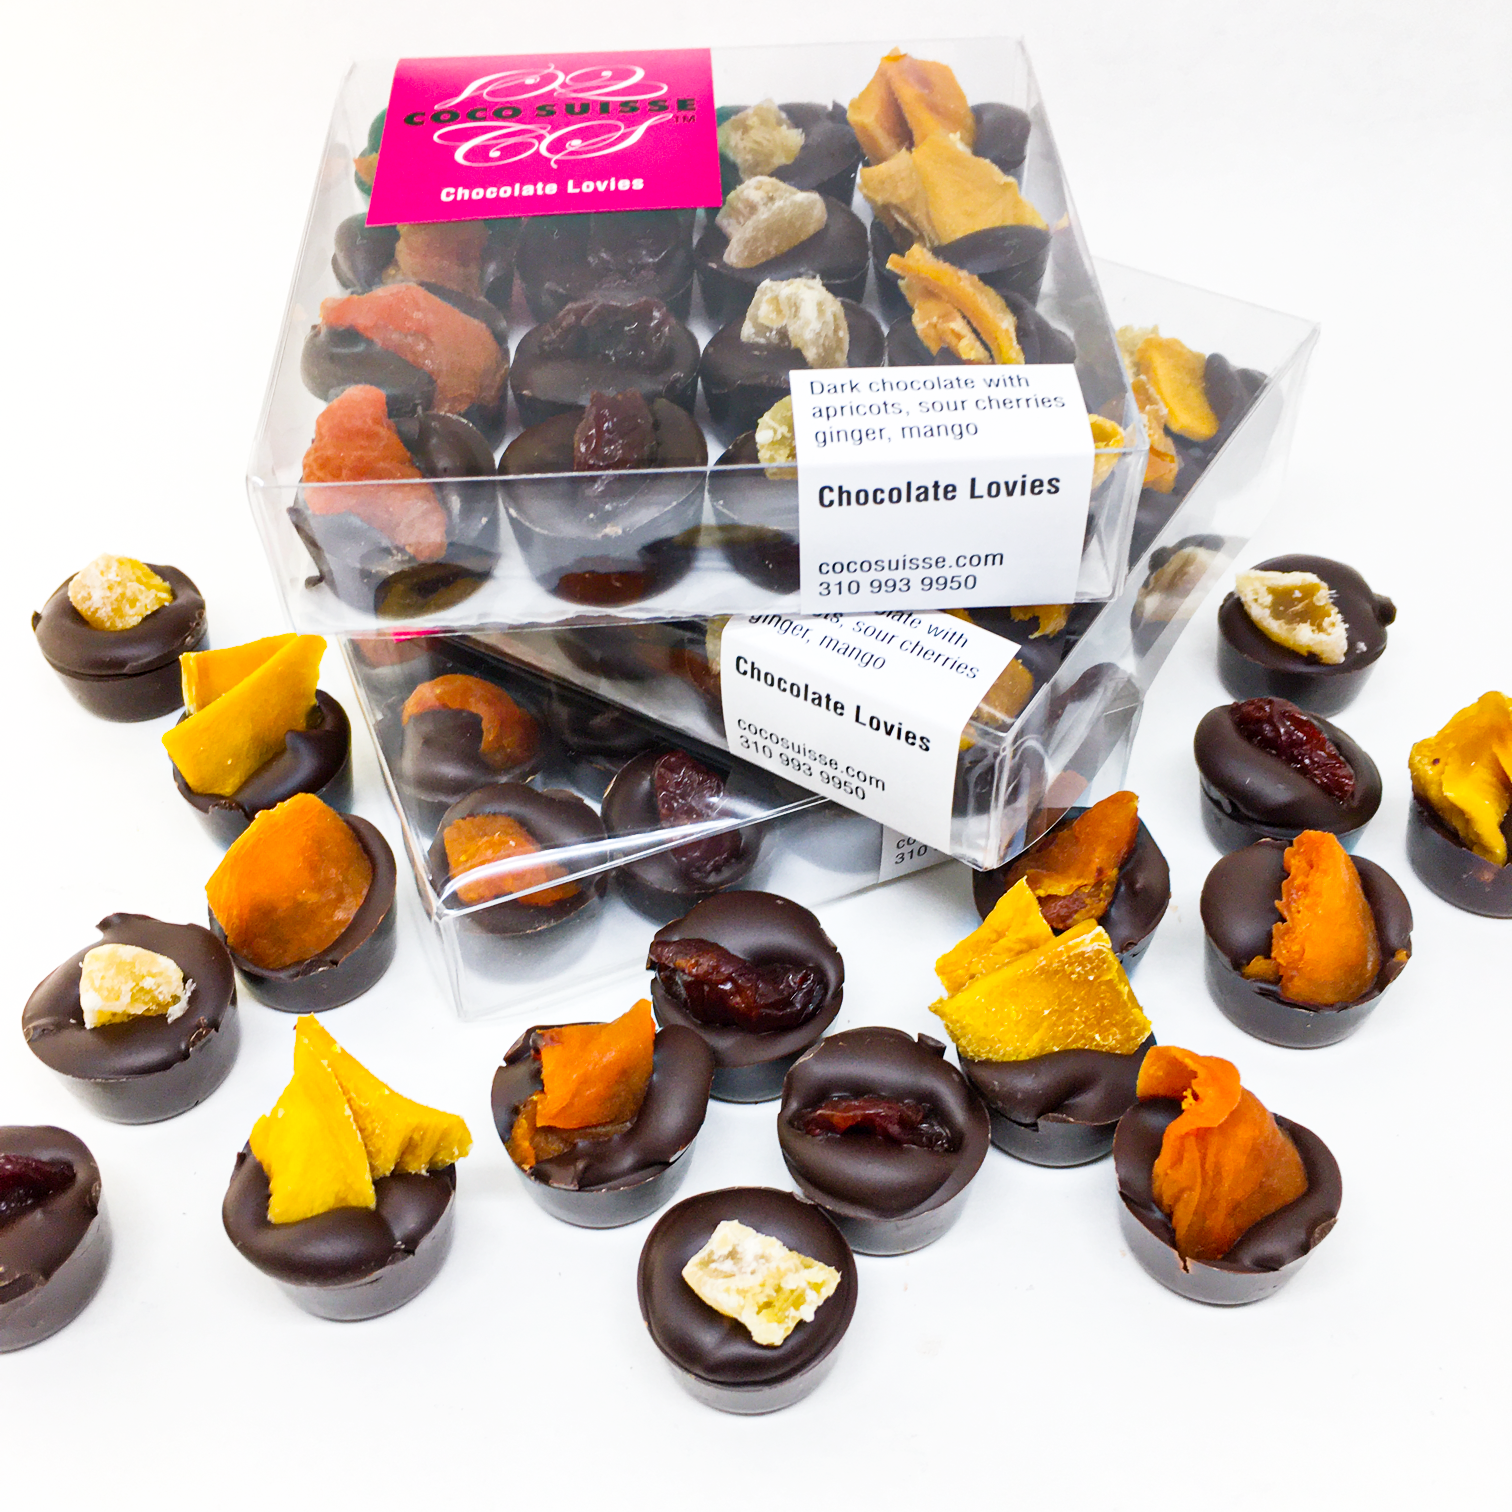 Coco Suisse Chocolate Lovies are made with dark Swiss chocolate and are topped with sour cherry, apricot, ginger, and mango. Share the Lovie!